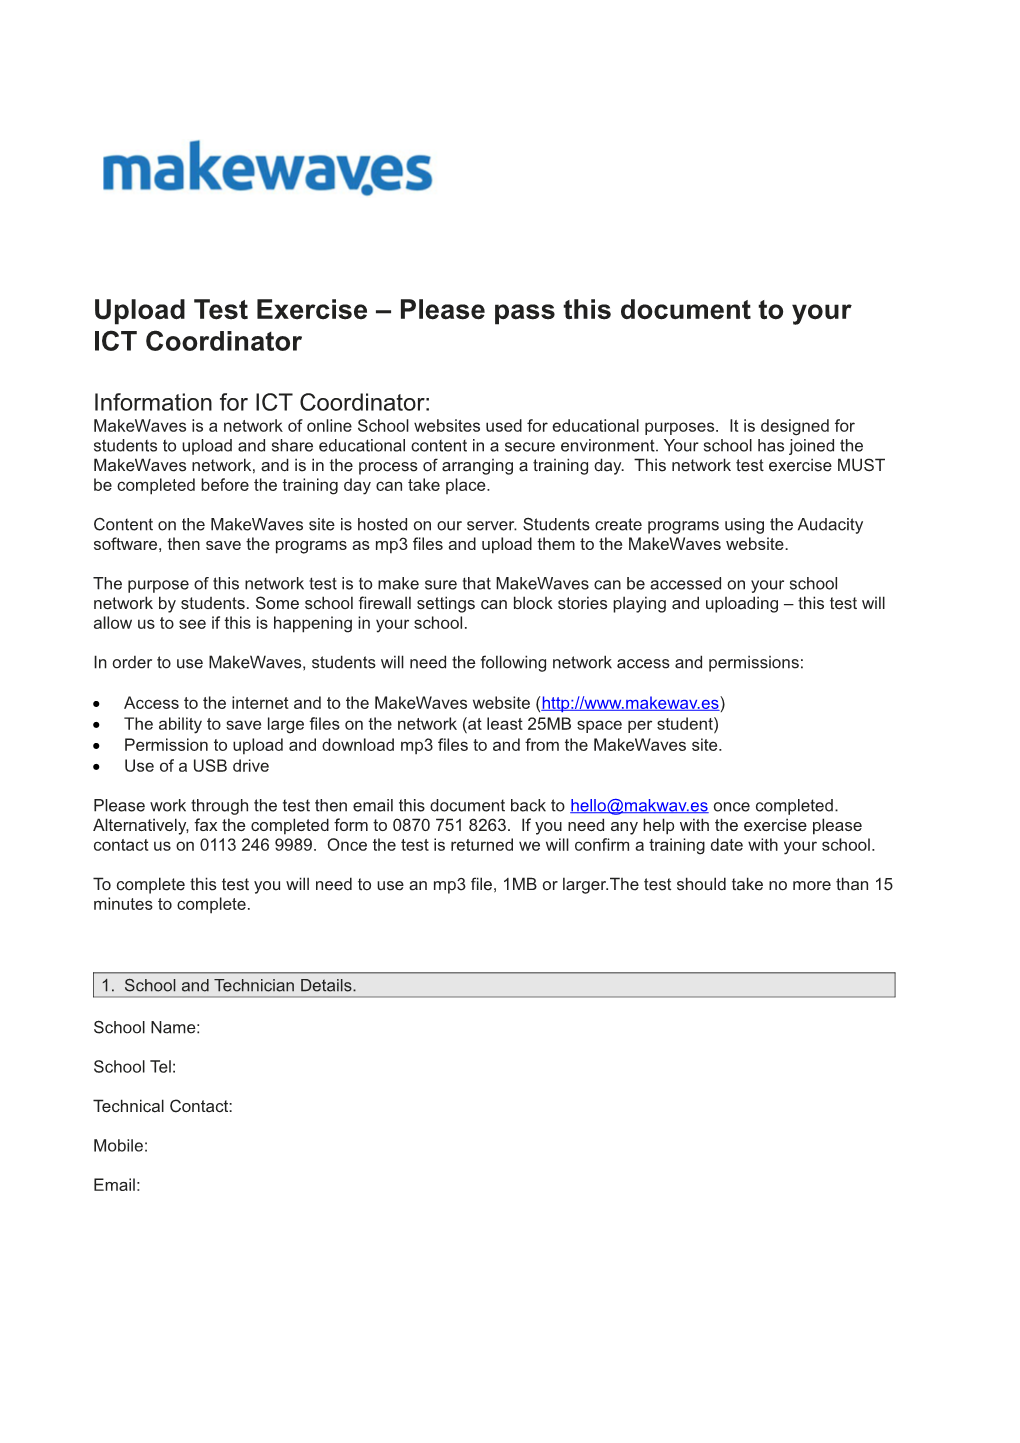 Upload Test Exercise Please Pass This Document to Your ICT Coordinator